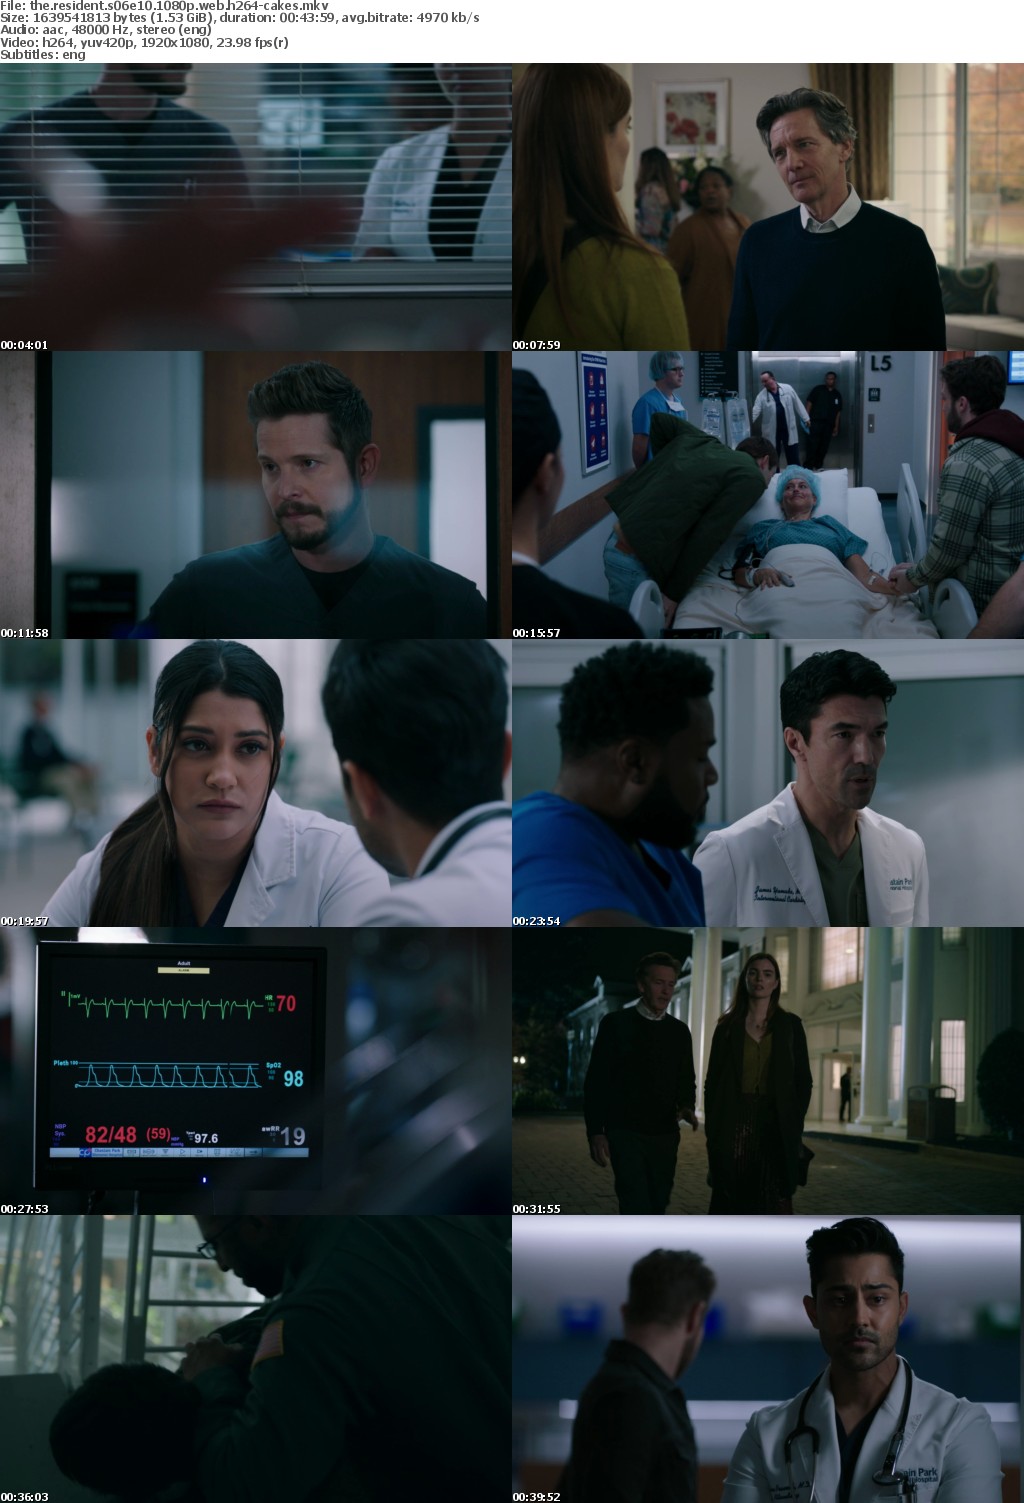 The Resident S06E10 1080p WEB H264-CAKES